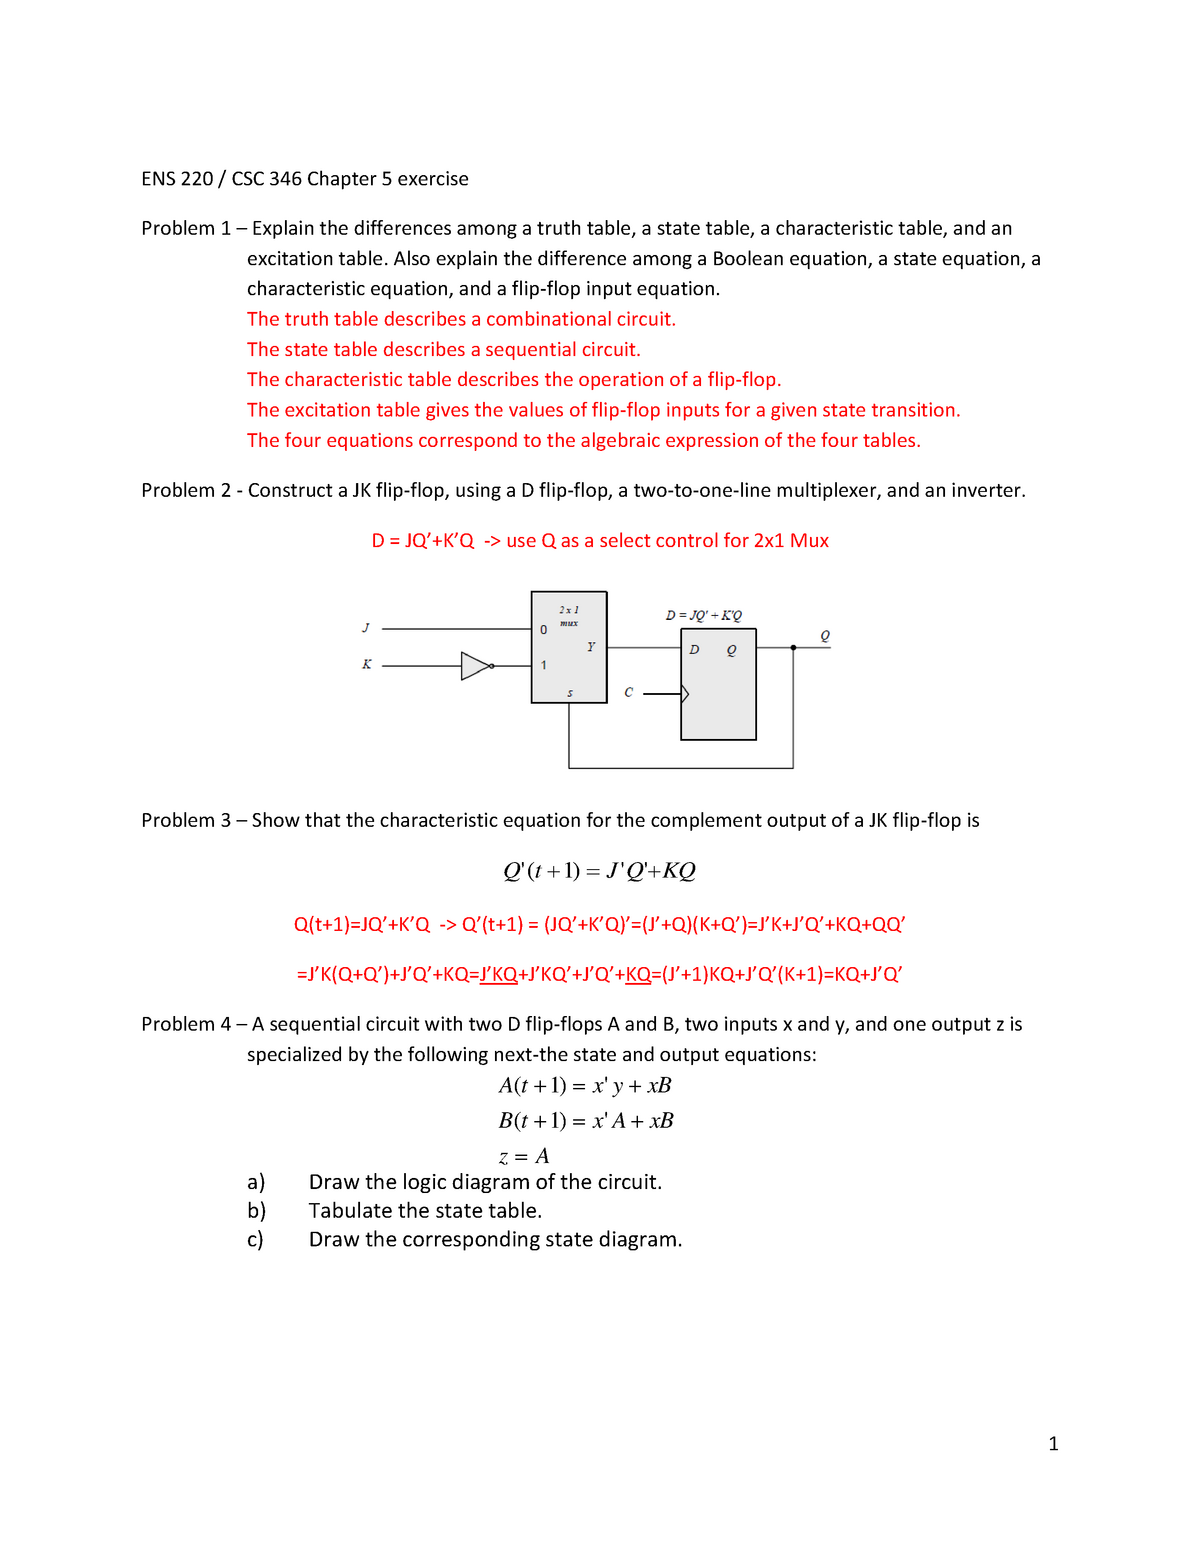 Ch5 Hw Solution V1 N A Ens 2 Csc 346 Chapter Exercise Problem Explain The Differences Among Truth Table State Table Characteristic Table And An Excitation Studocu